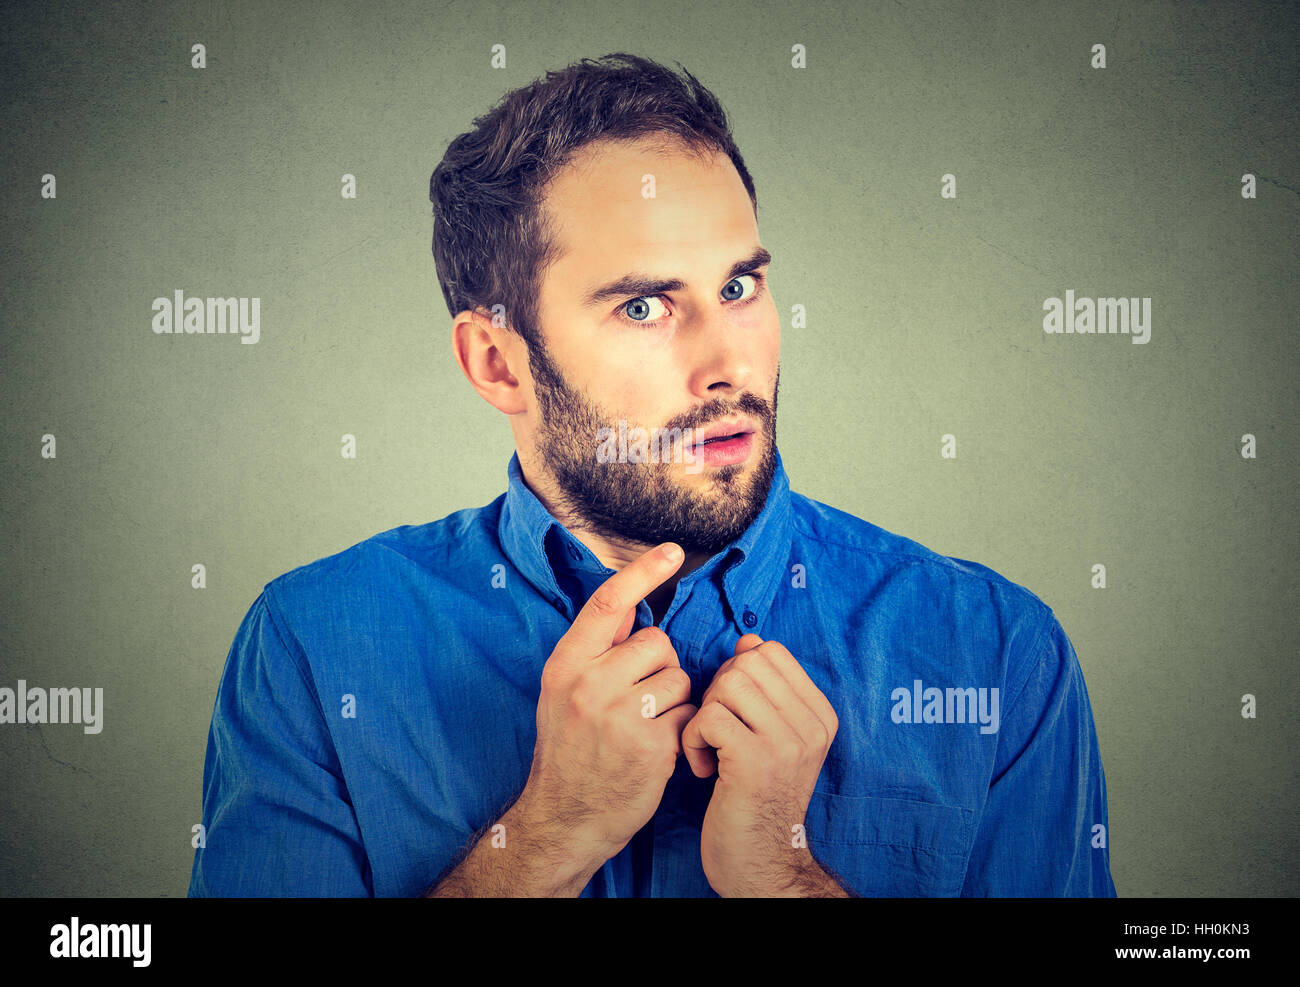 Suspicious worried young man Stock Photo